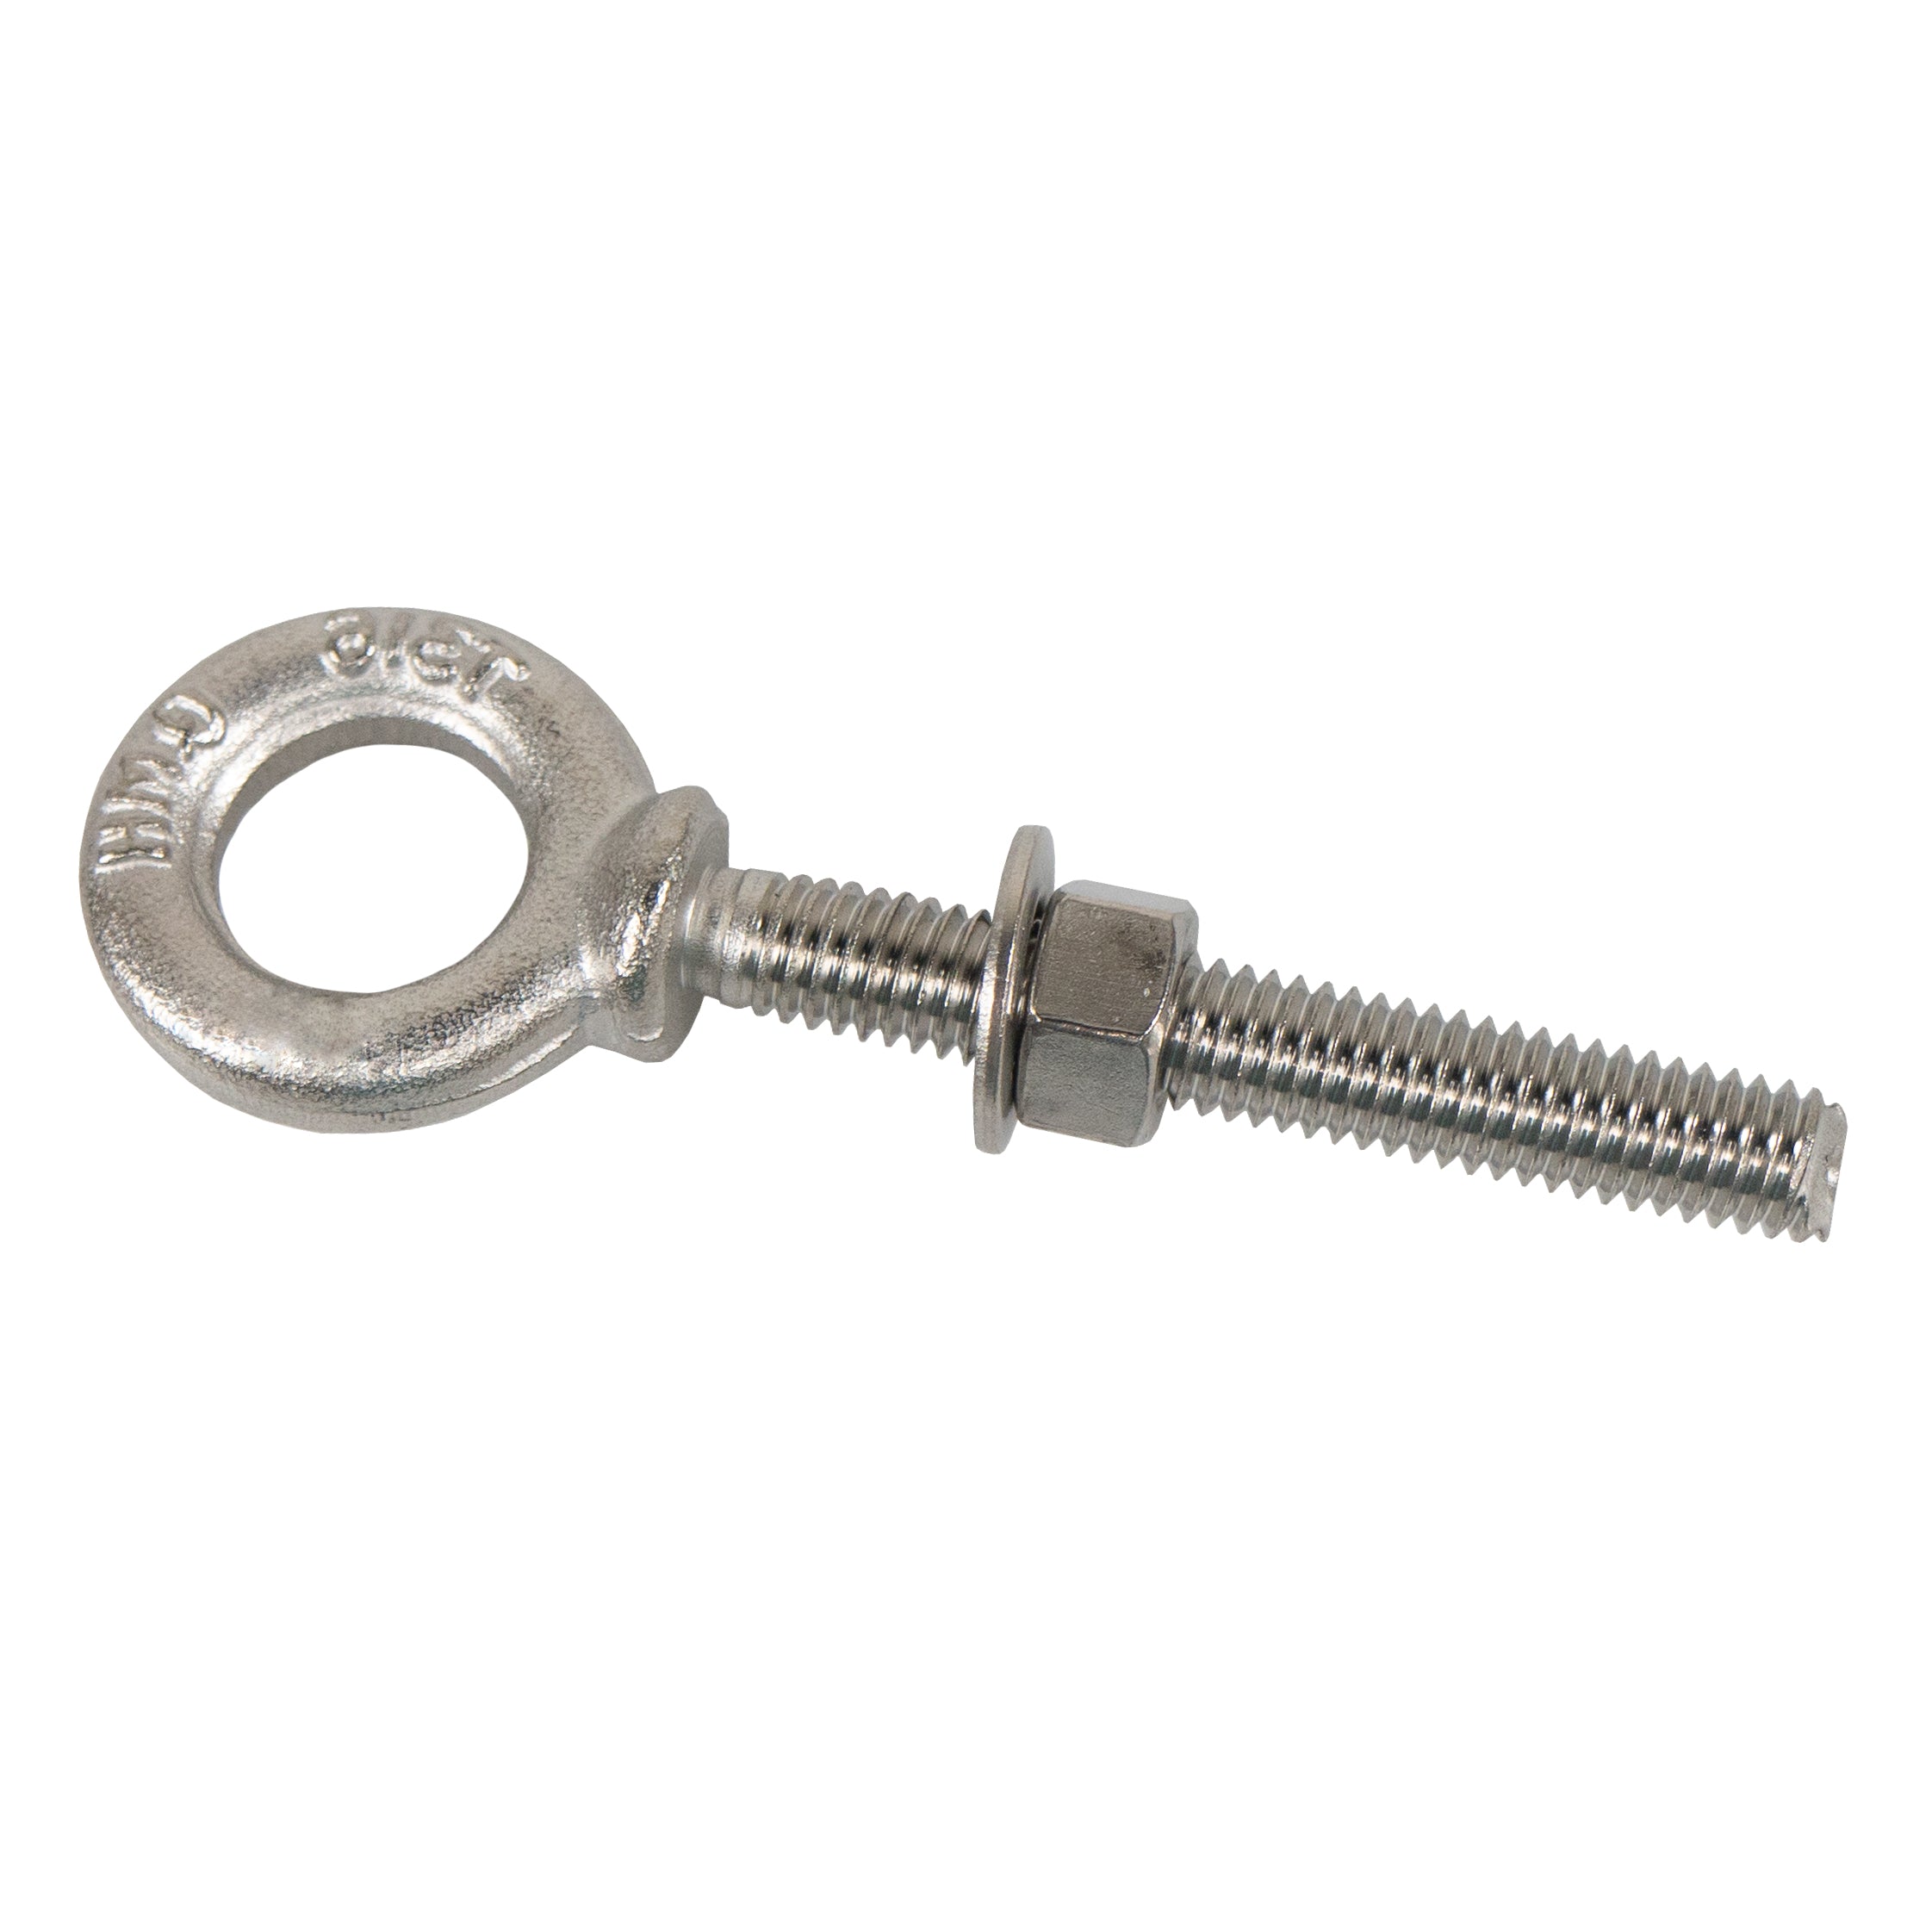 Forged Shoulder Eye Bolts Stainless Steel, 1/2